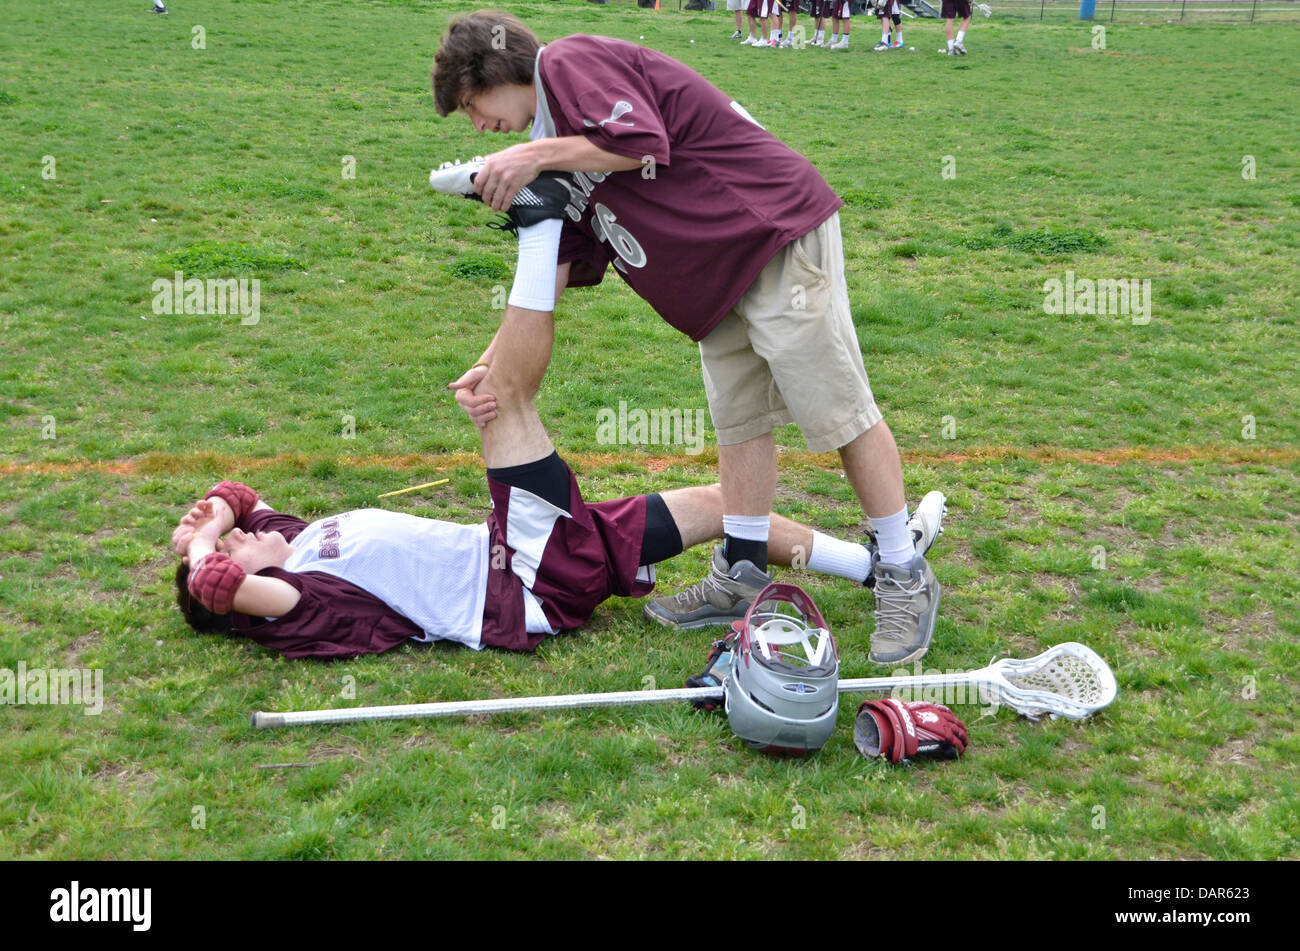 Lacrosse player helps his teammate with stretching before the game Stock Photo